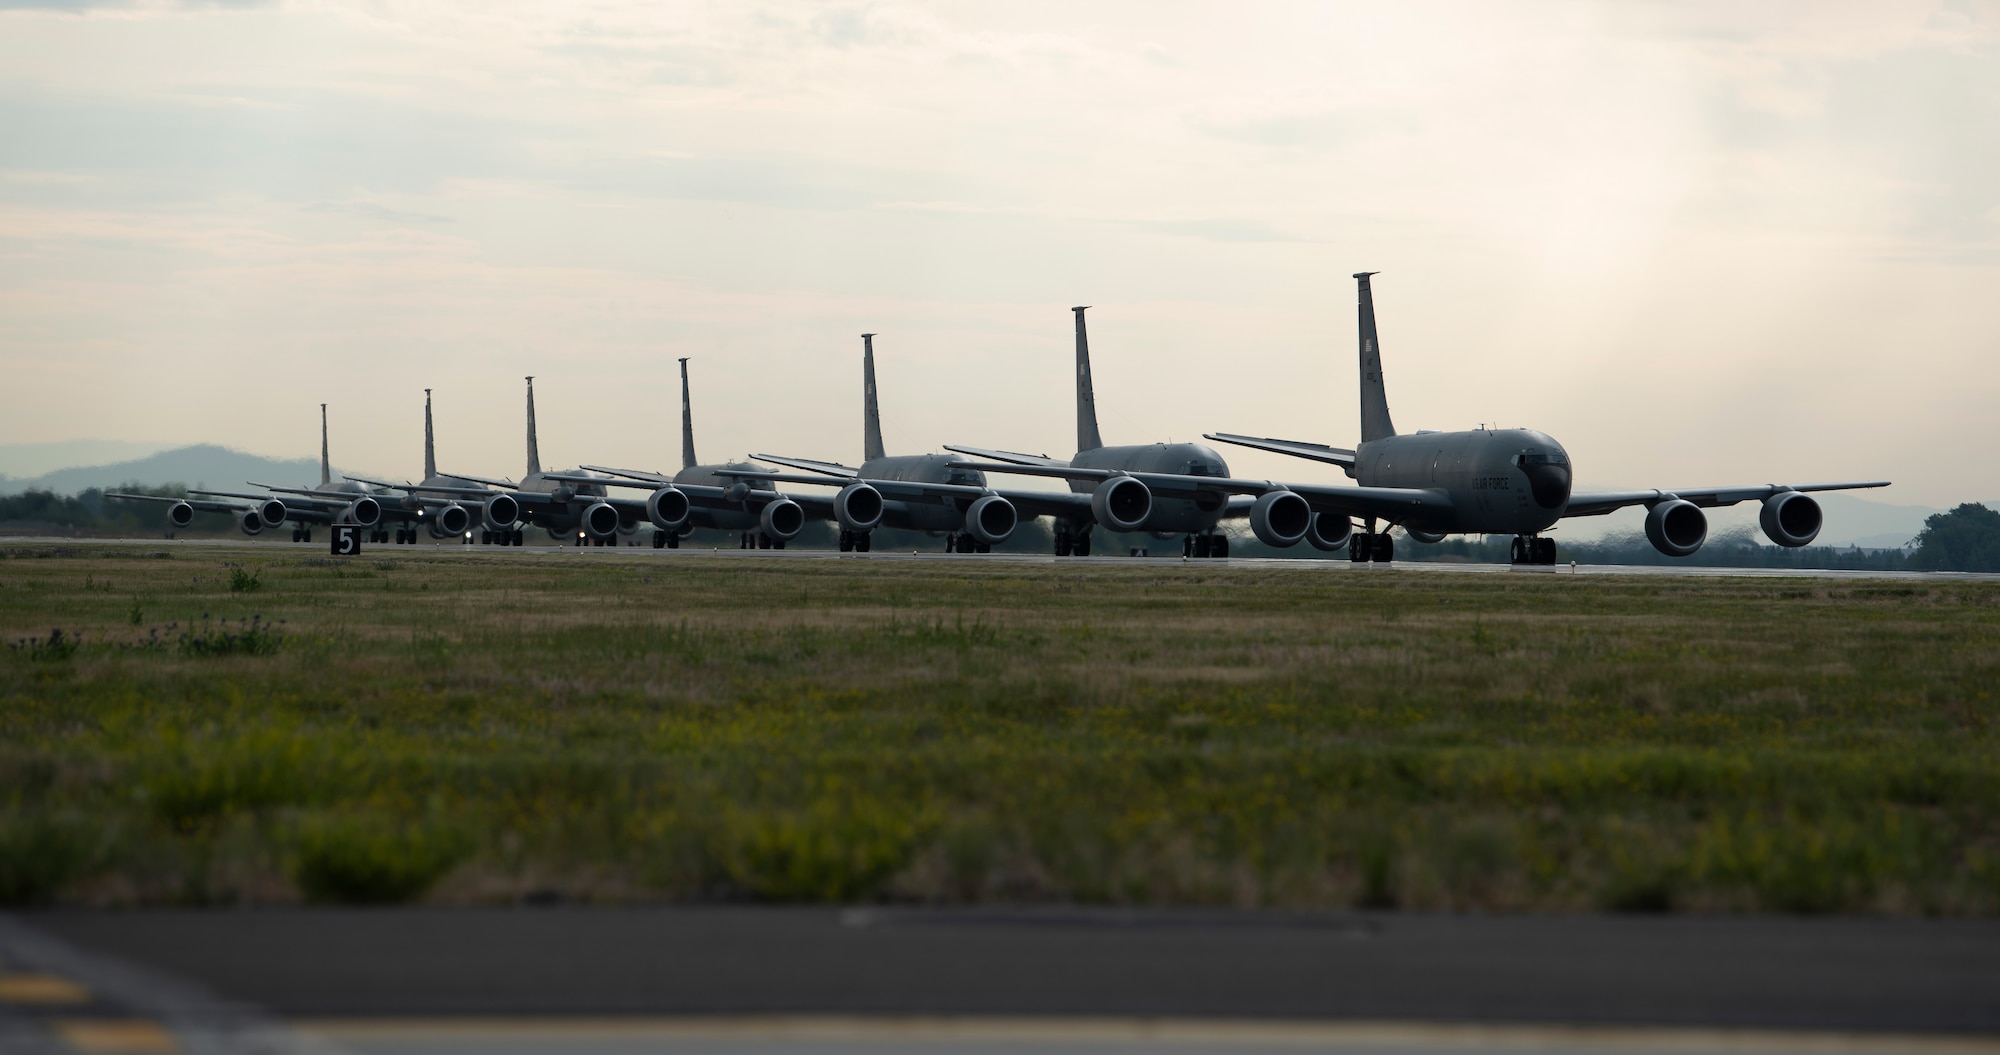 KC-135 Stratotankers assigned to the 92nd Air Refueling Wing and 141st Air Refueling Wing taxi into position before takeoff as part of Operation Centennial Contact at Fairchild Air force Base, Washington, June 27, 2023. The movement, which included stops at Yellowstone National Park, Mount Rushmore and Glacier National Park, was part of Air Mobility Command’s celebration of 100 years air refueling operations and demonstrated the 92nd Air Refueling Wing’s global reach capabilities. Since its inception in 1923, Air refueling has become a crucial component of military and civilian aviation operations around the world by extending the range and endurance of aircraft and enabling them to complete missions that would otherwise be impossible or require multiple stops. As a result, this capability is essential for strategic and tactical operations, as well as humanitarian relief efforts in support of AMC, U.S. Transportation Command and Department of Defense priorities. (U.S. Air Force photo by Tech. Sgt. Michael Brown)